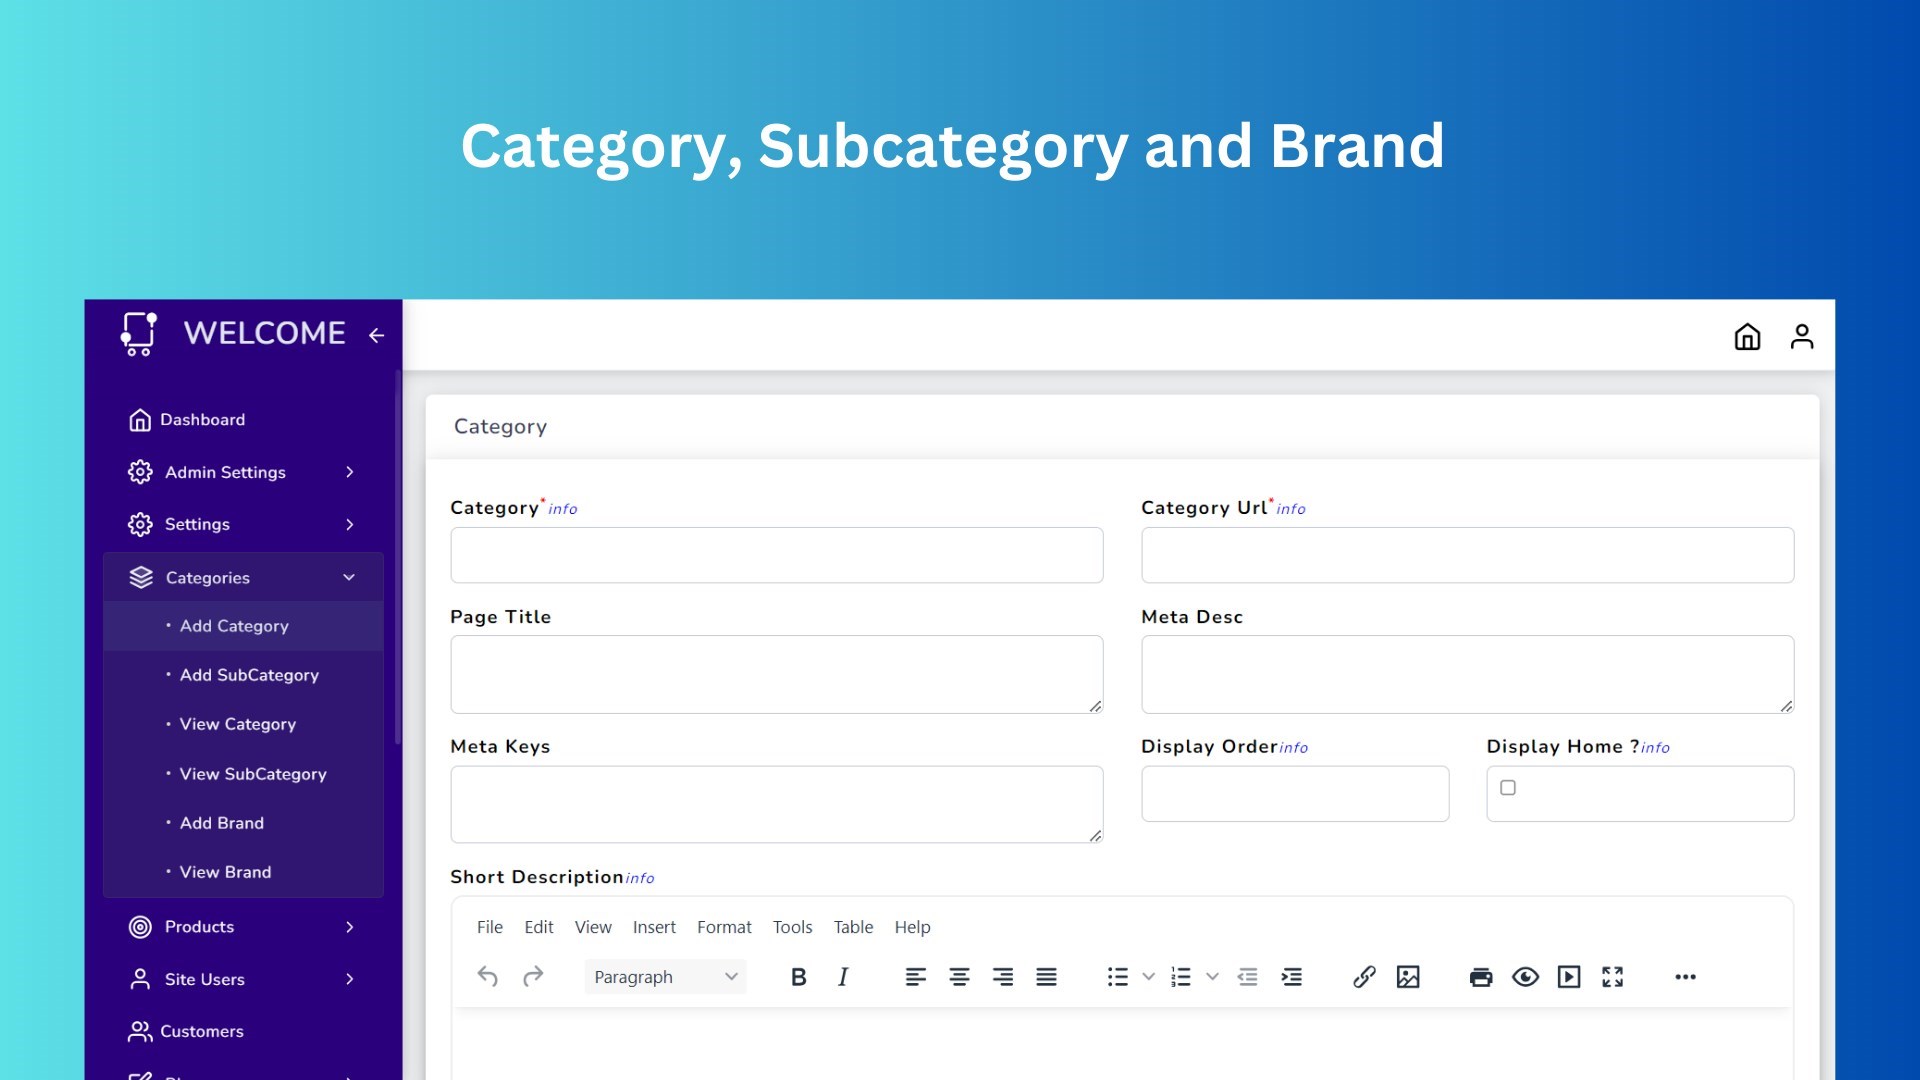 Feature for managing categories, subcategories, and brands, enabling users to create, edit, delete, and browse through these entities to organize and categorize products efficiently